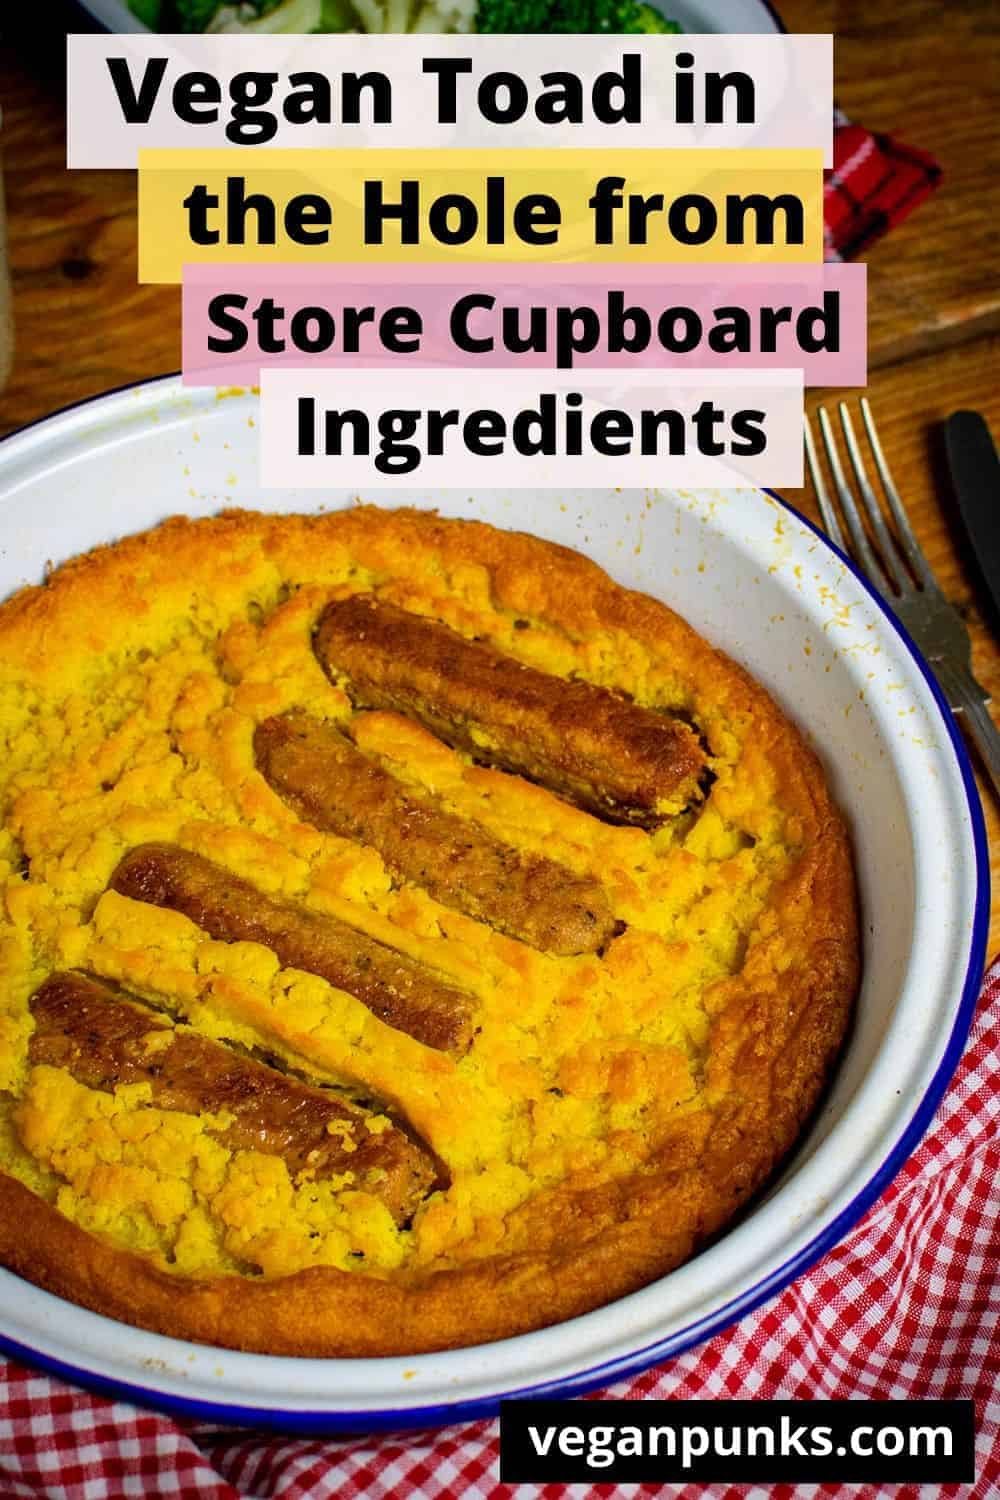 A Pinterest image showing a photo of vegan toad in the hole  with the words 'Vegan Toad in the Hole from Store Cupboard Ingredients' written above it.